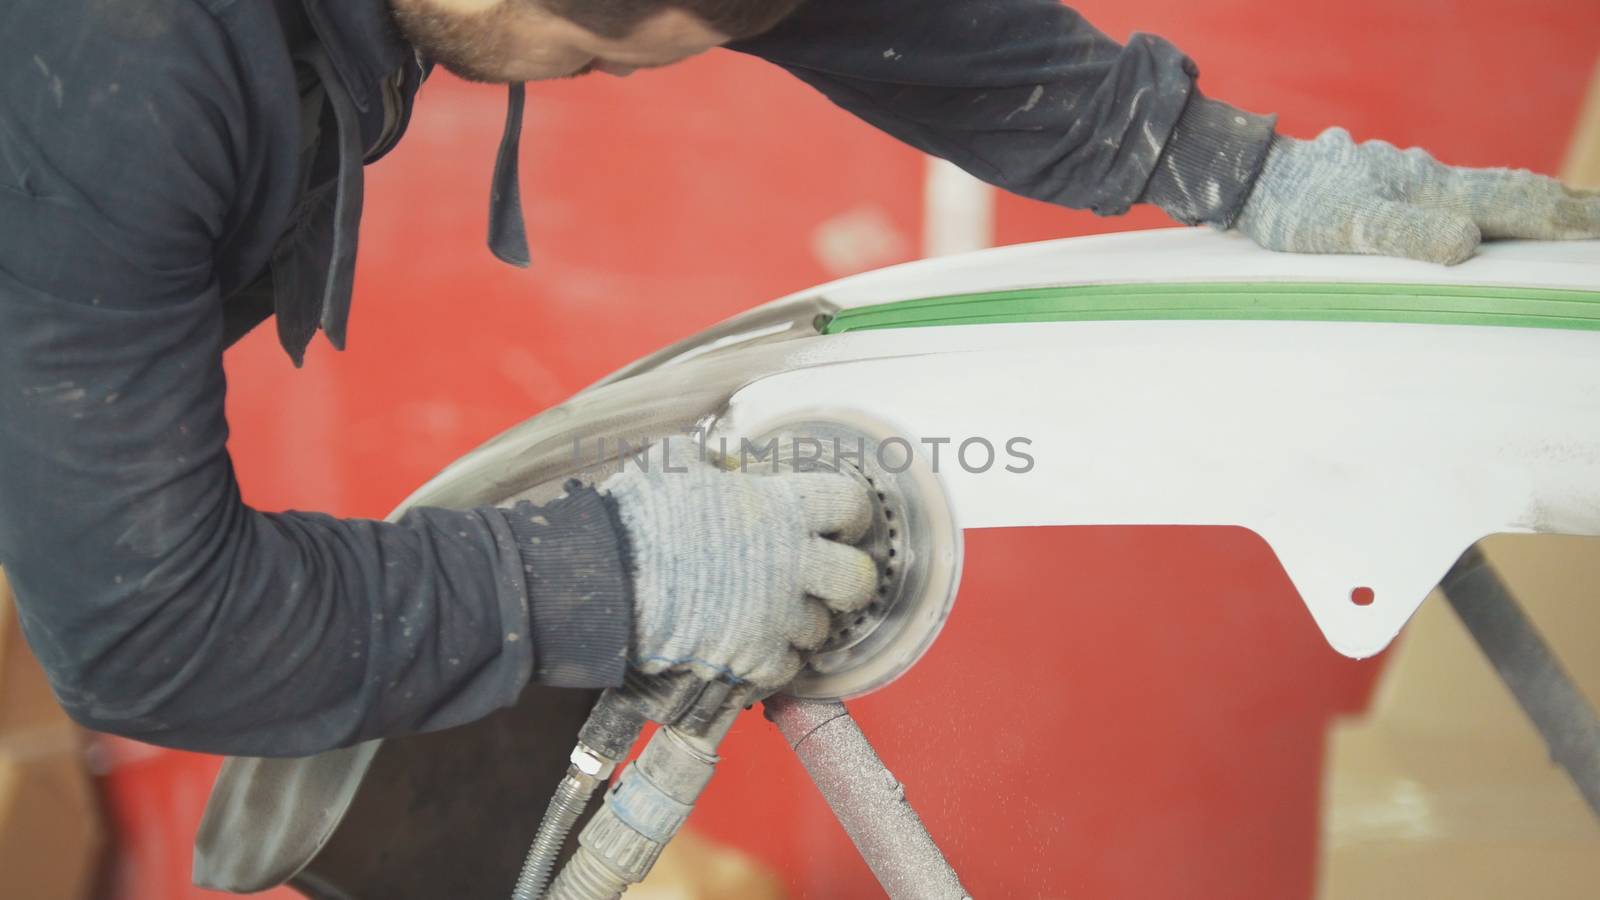 Automobile service - a worker polishes a car, close up by Studia72